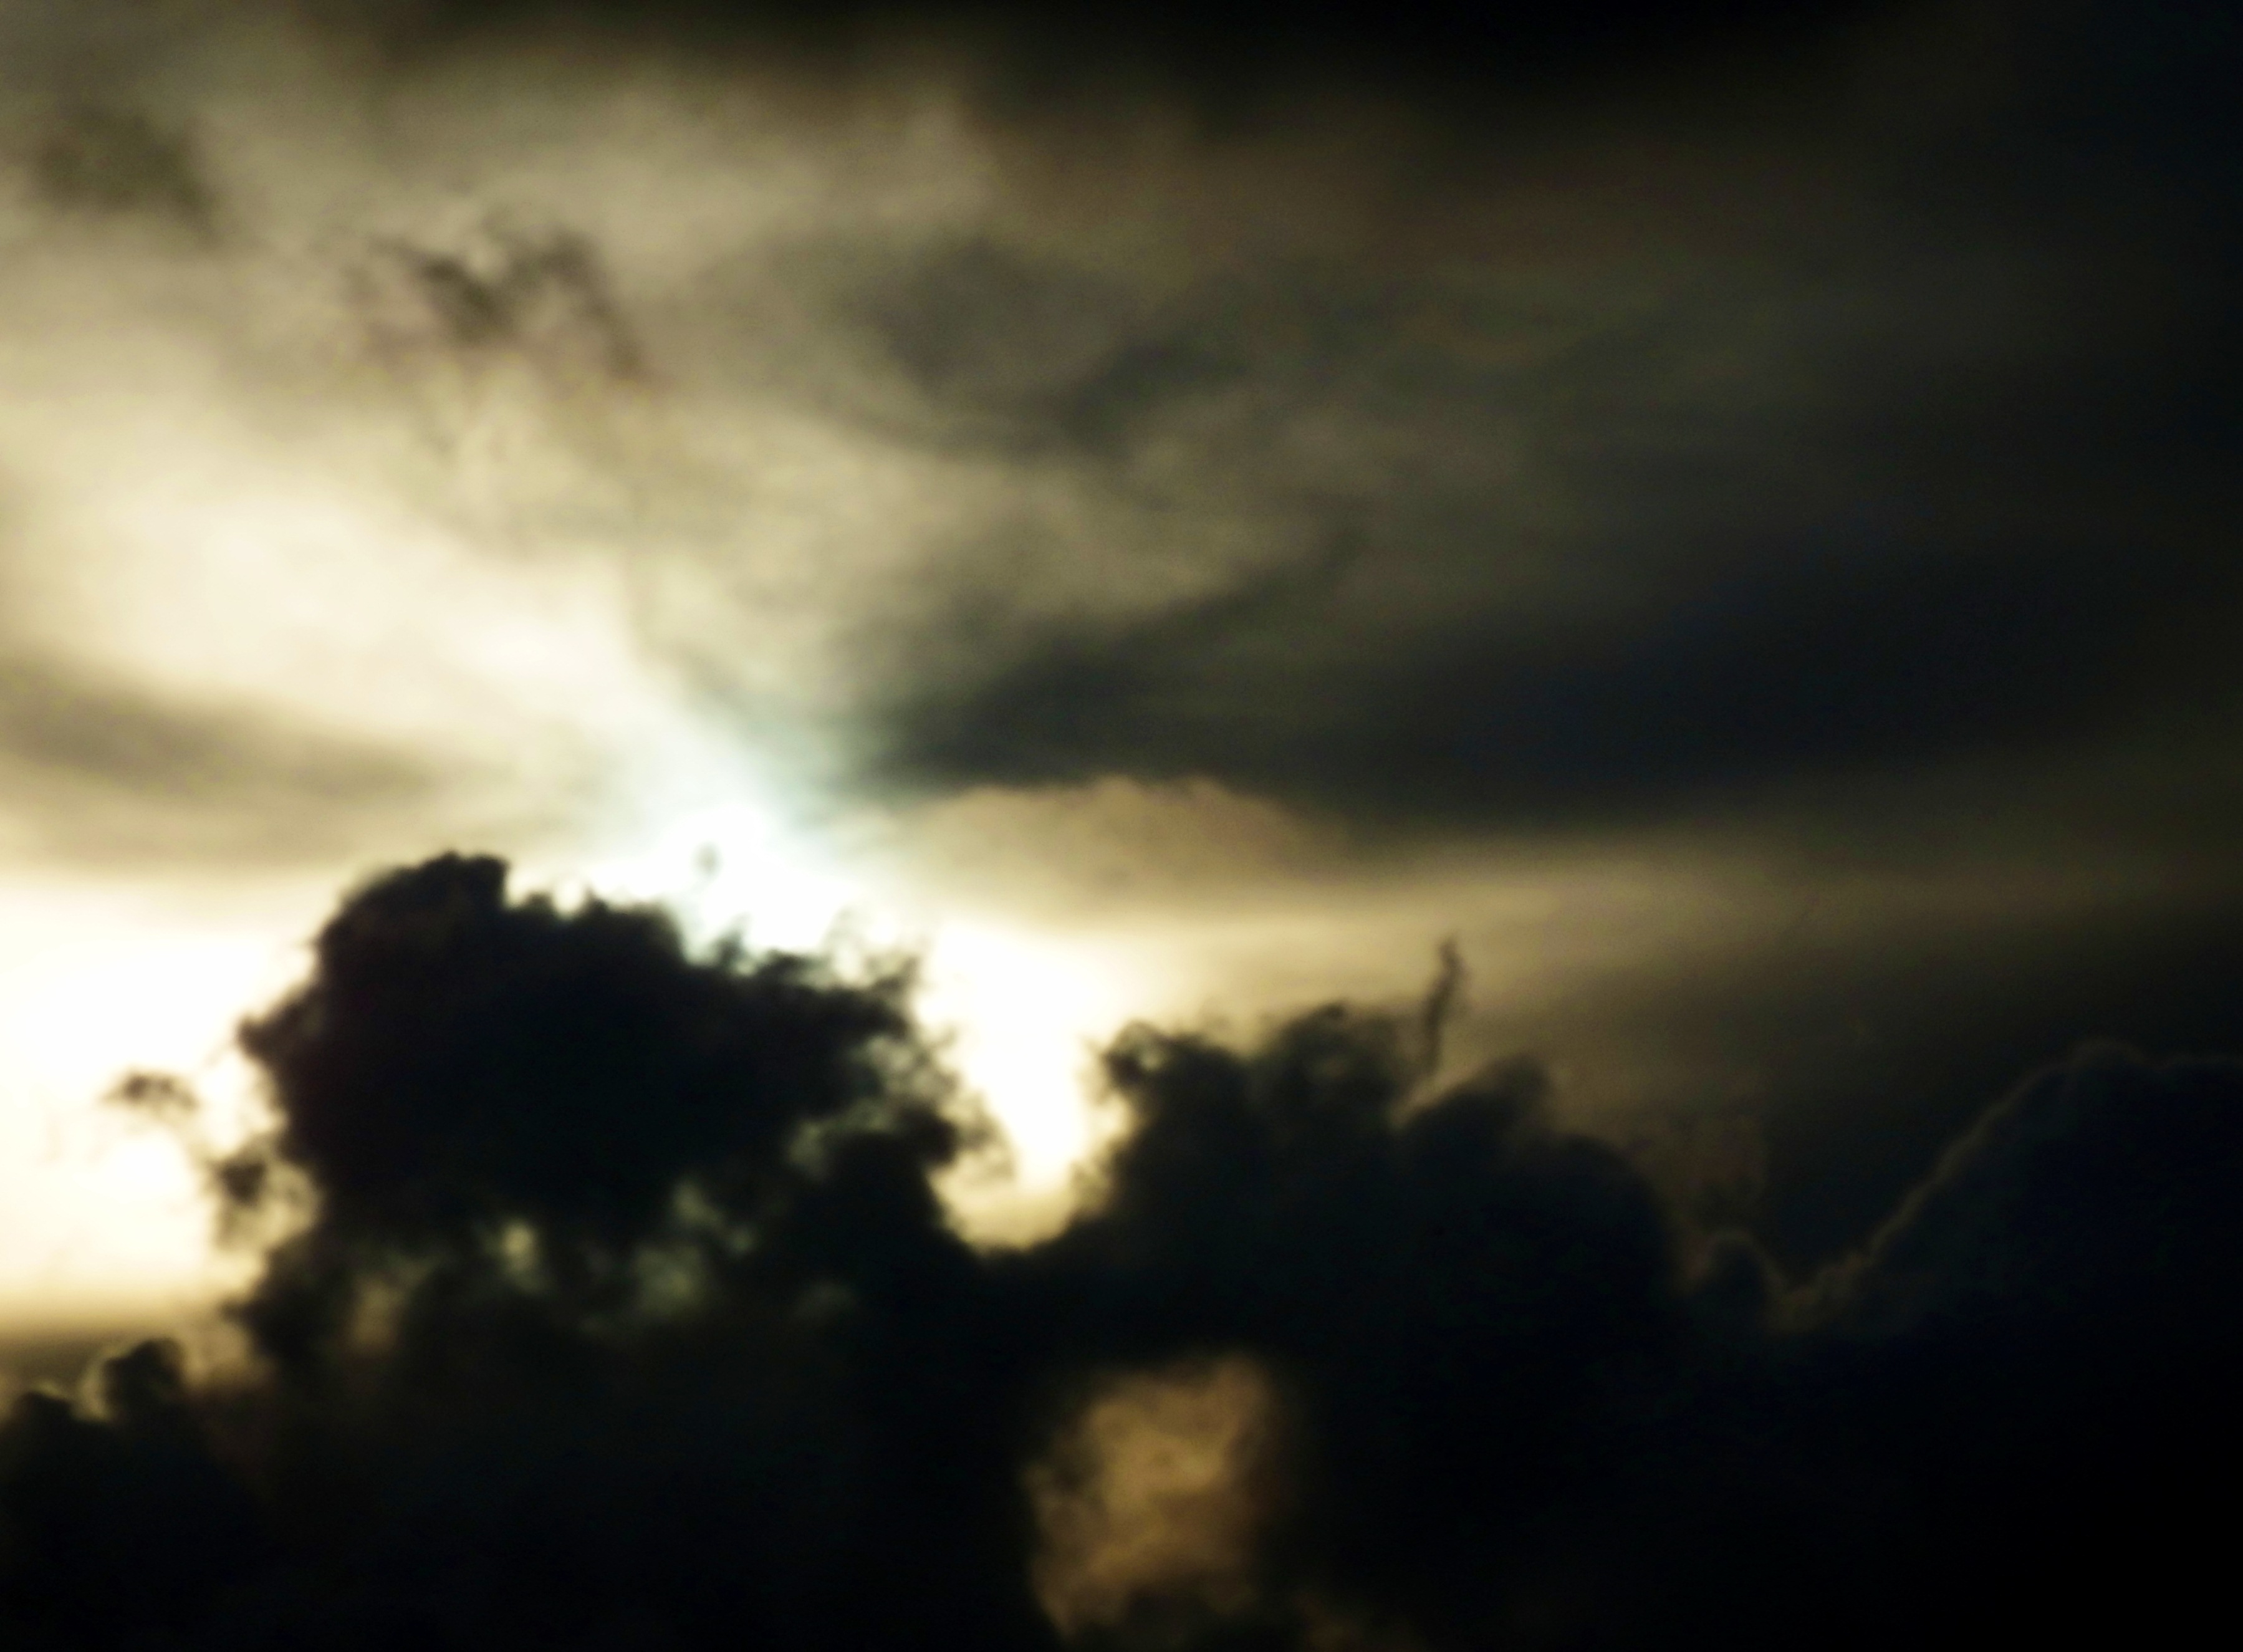 Dark Clouds Stormy Sky, Atmosphere, Moody, Thunderstorm, Thunder, HQ Photo